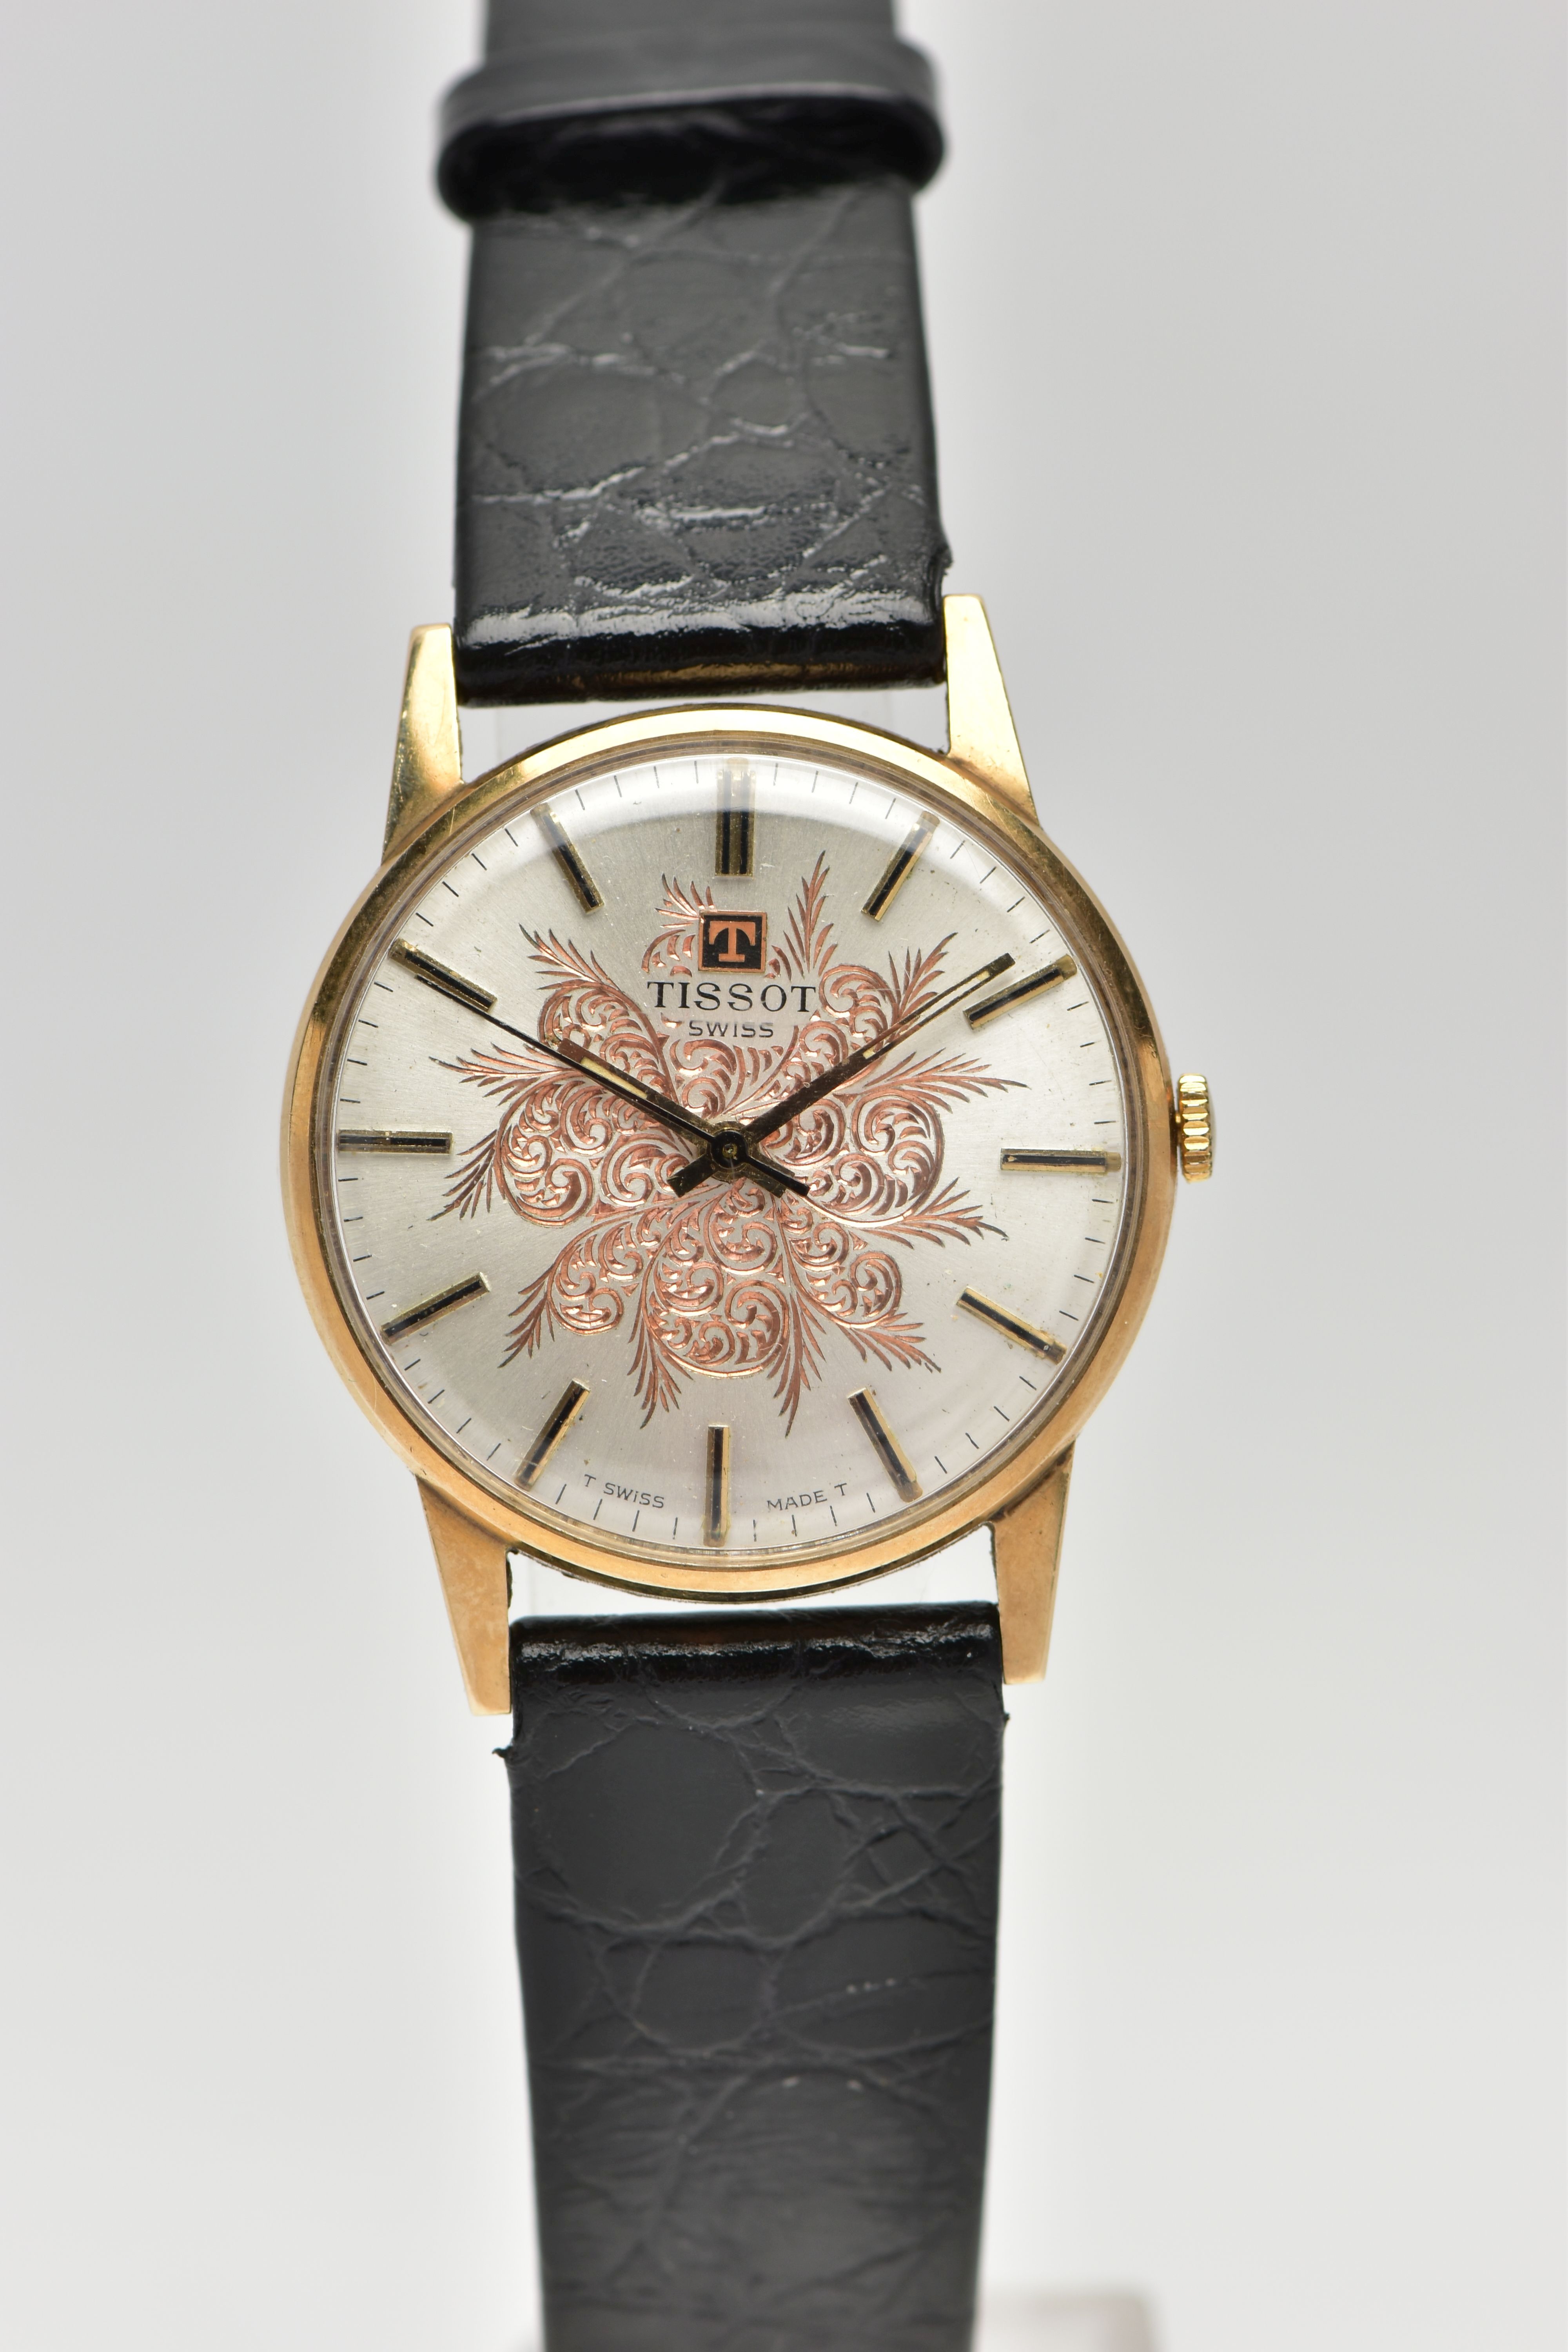 A 9CT YELLOW GOLD TISSOT WRISTWATCH, the silver coloured dial, with black enamel and gilt hourly